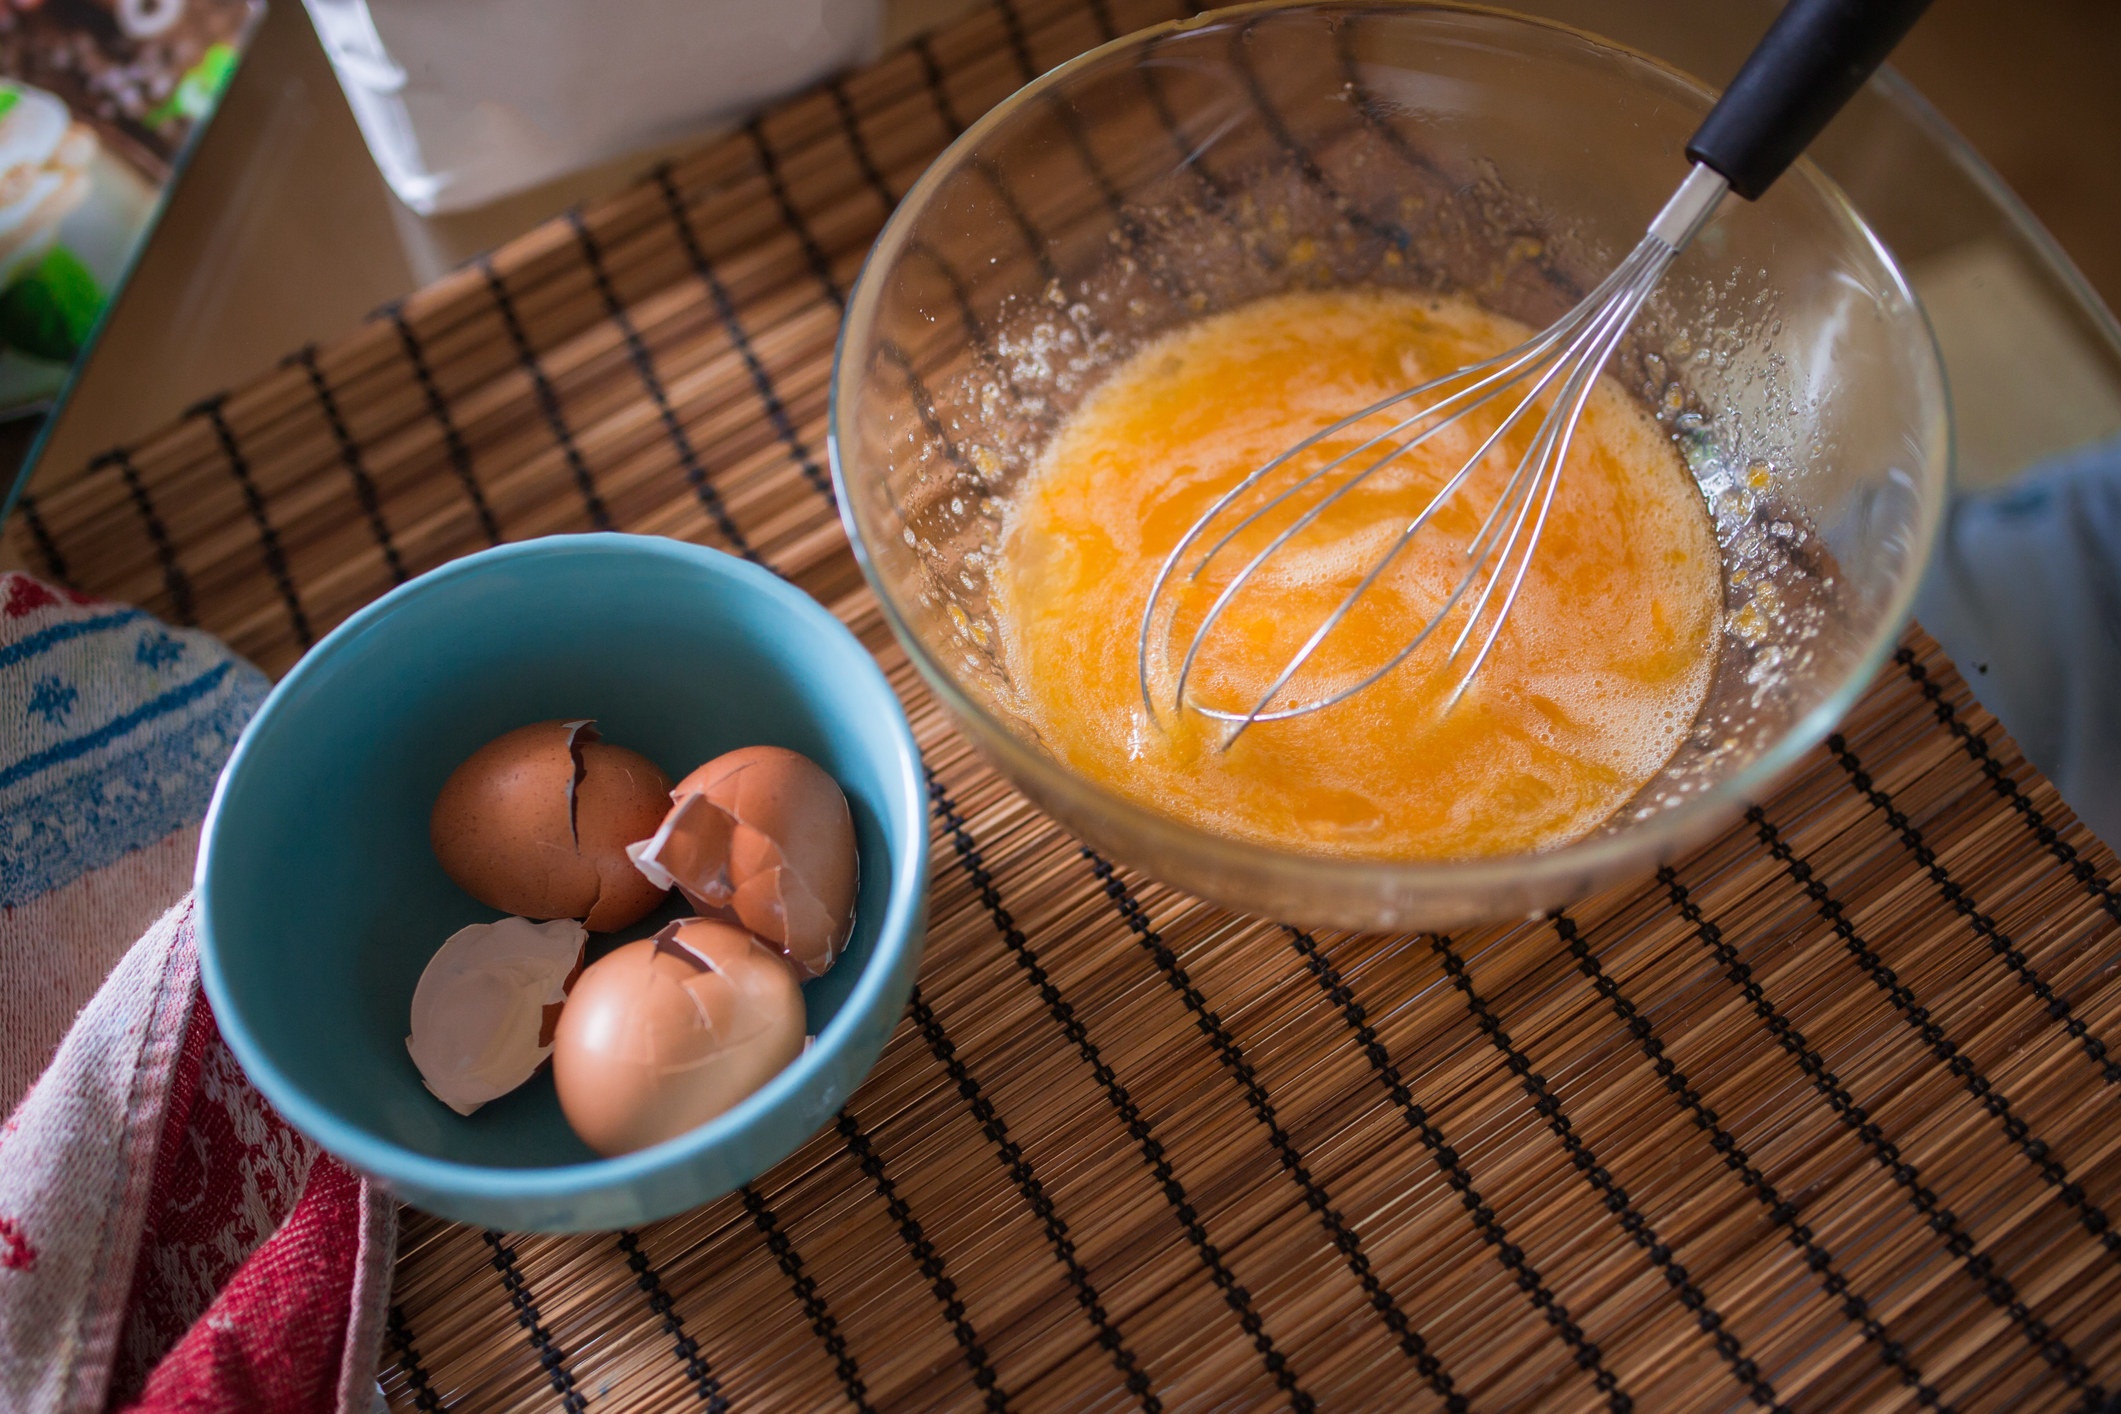 Beaten eggs in a glass bowl on the table.